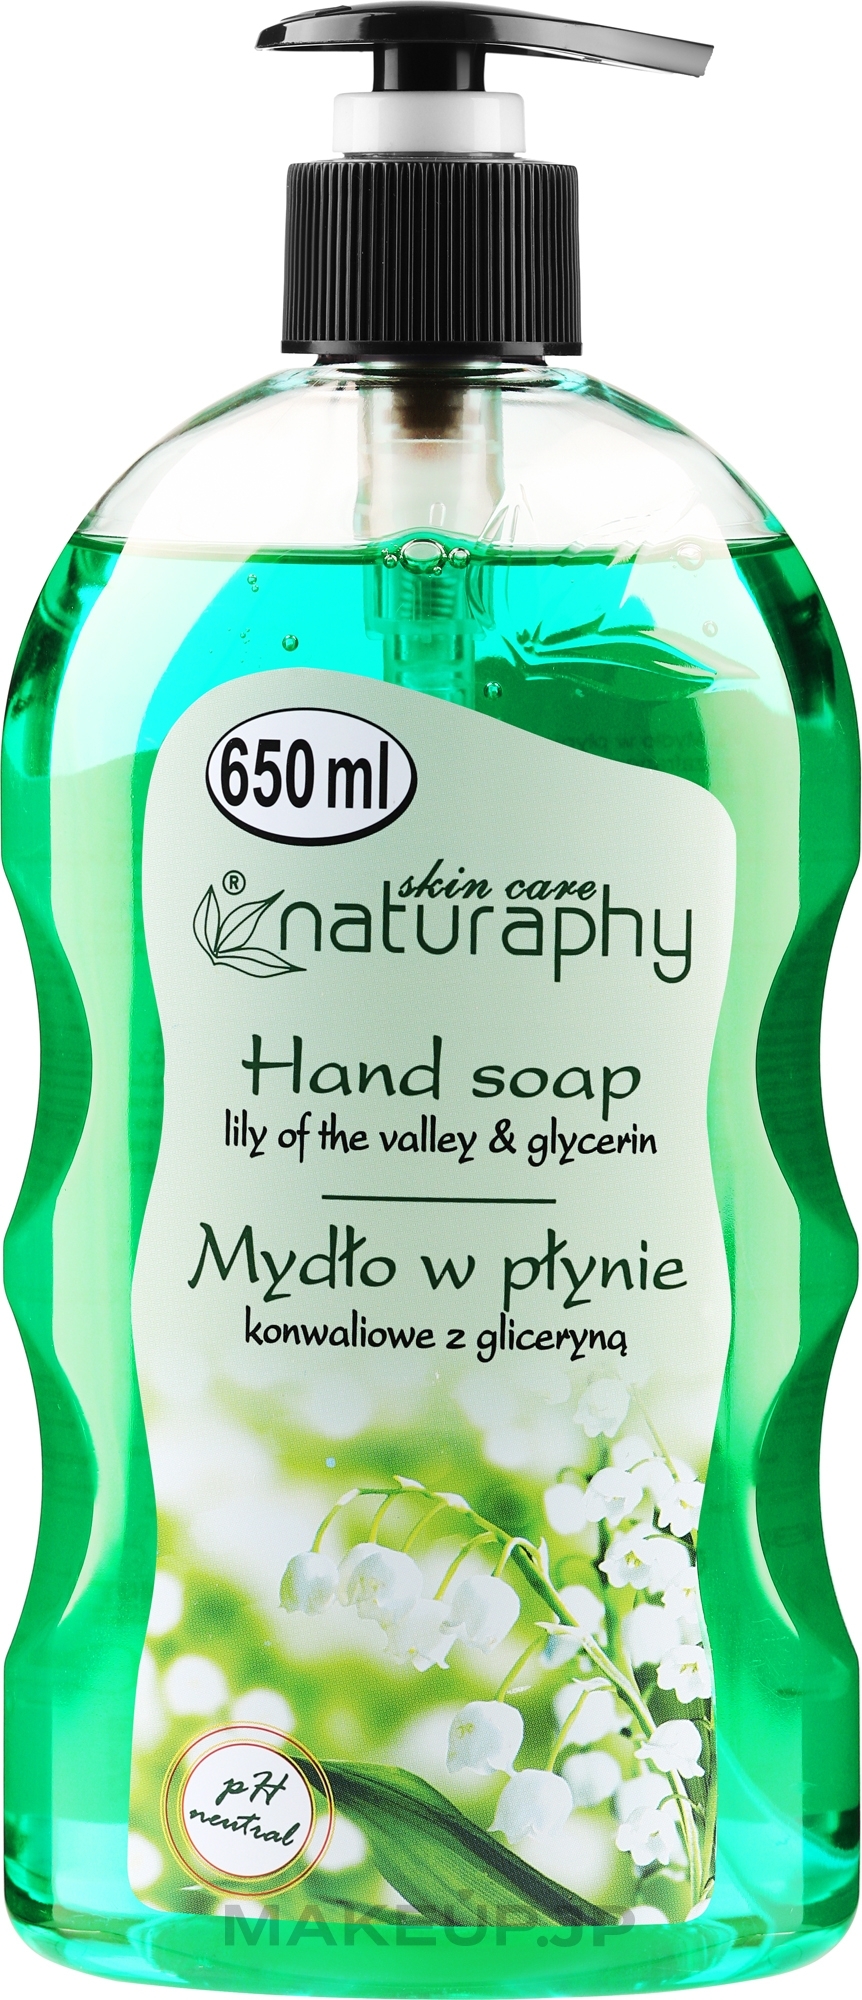 Hand Liquid Soap Lily of the Valley with Glycerin - Naturaphy Hand Soap — photo 650 ml